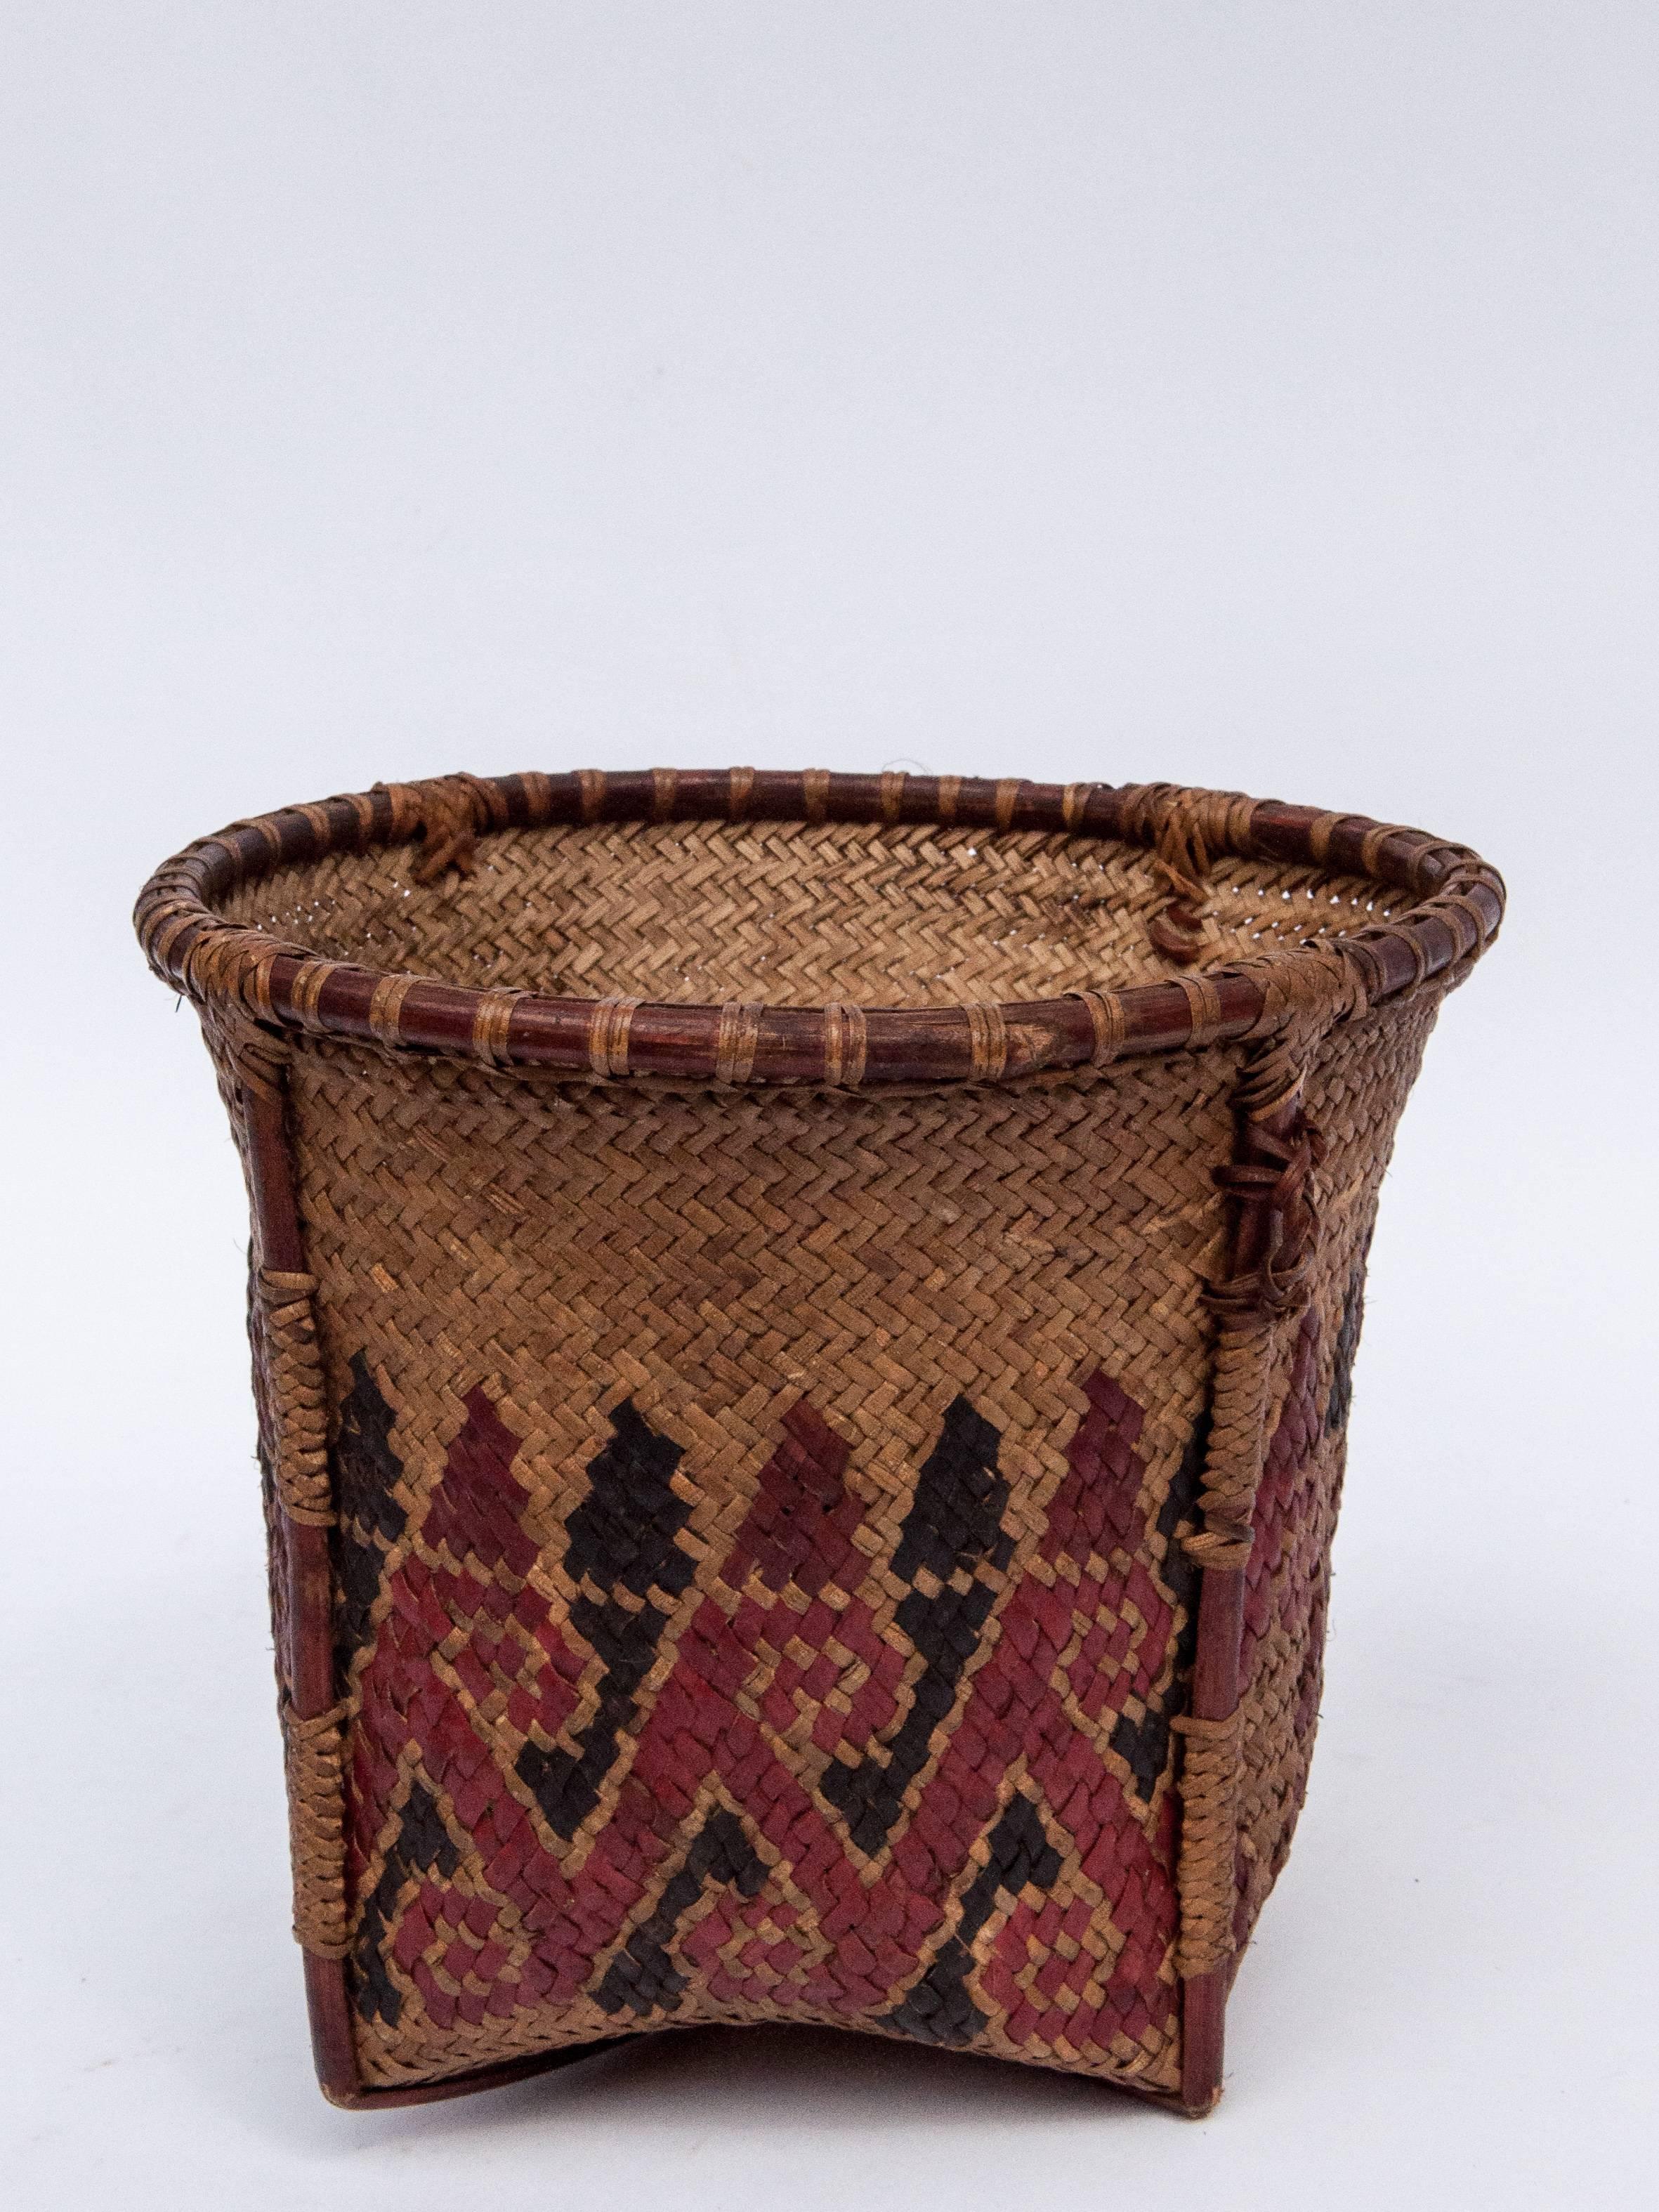 Indonesian Small Vintage Collecting Basket with Colored Design, Borneo, Mid-20th Century